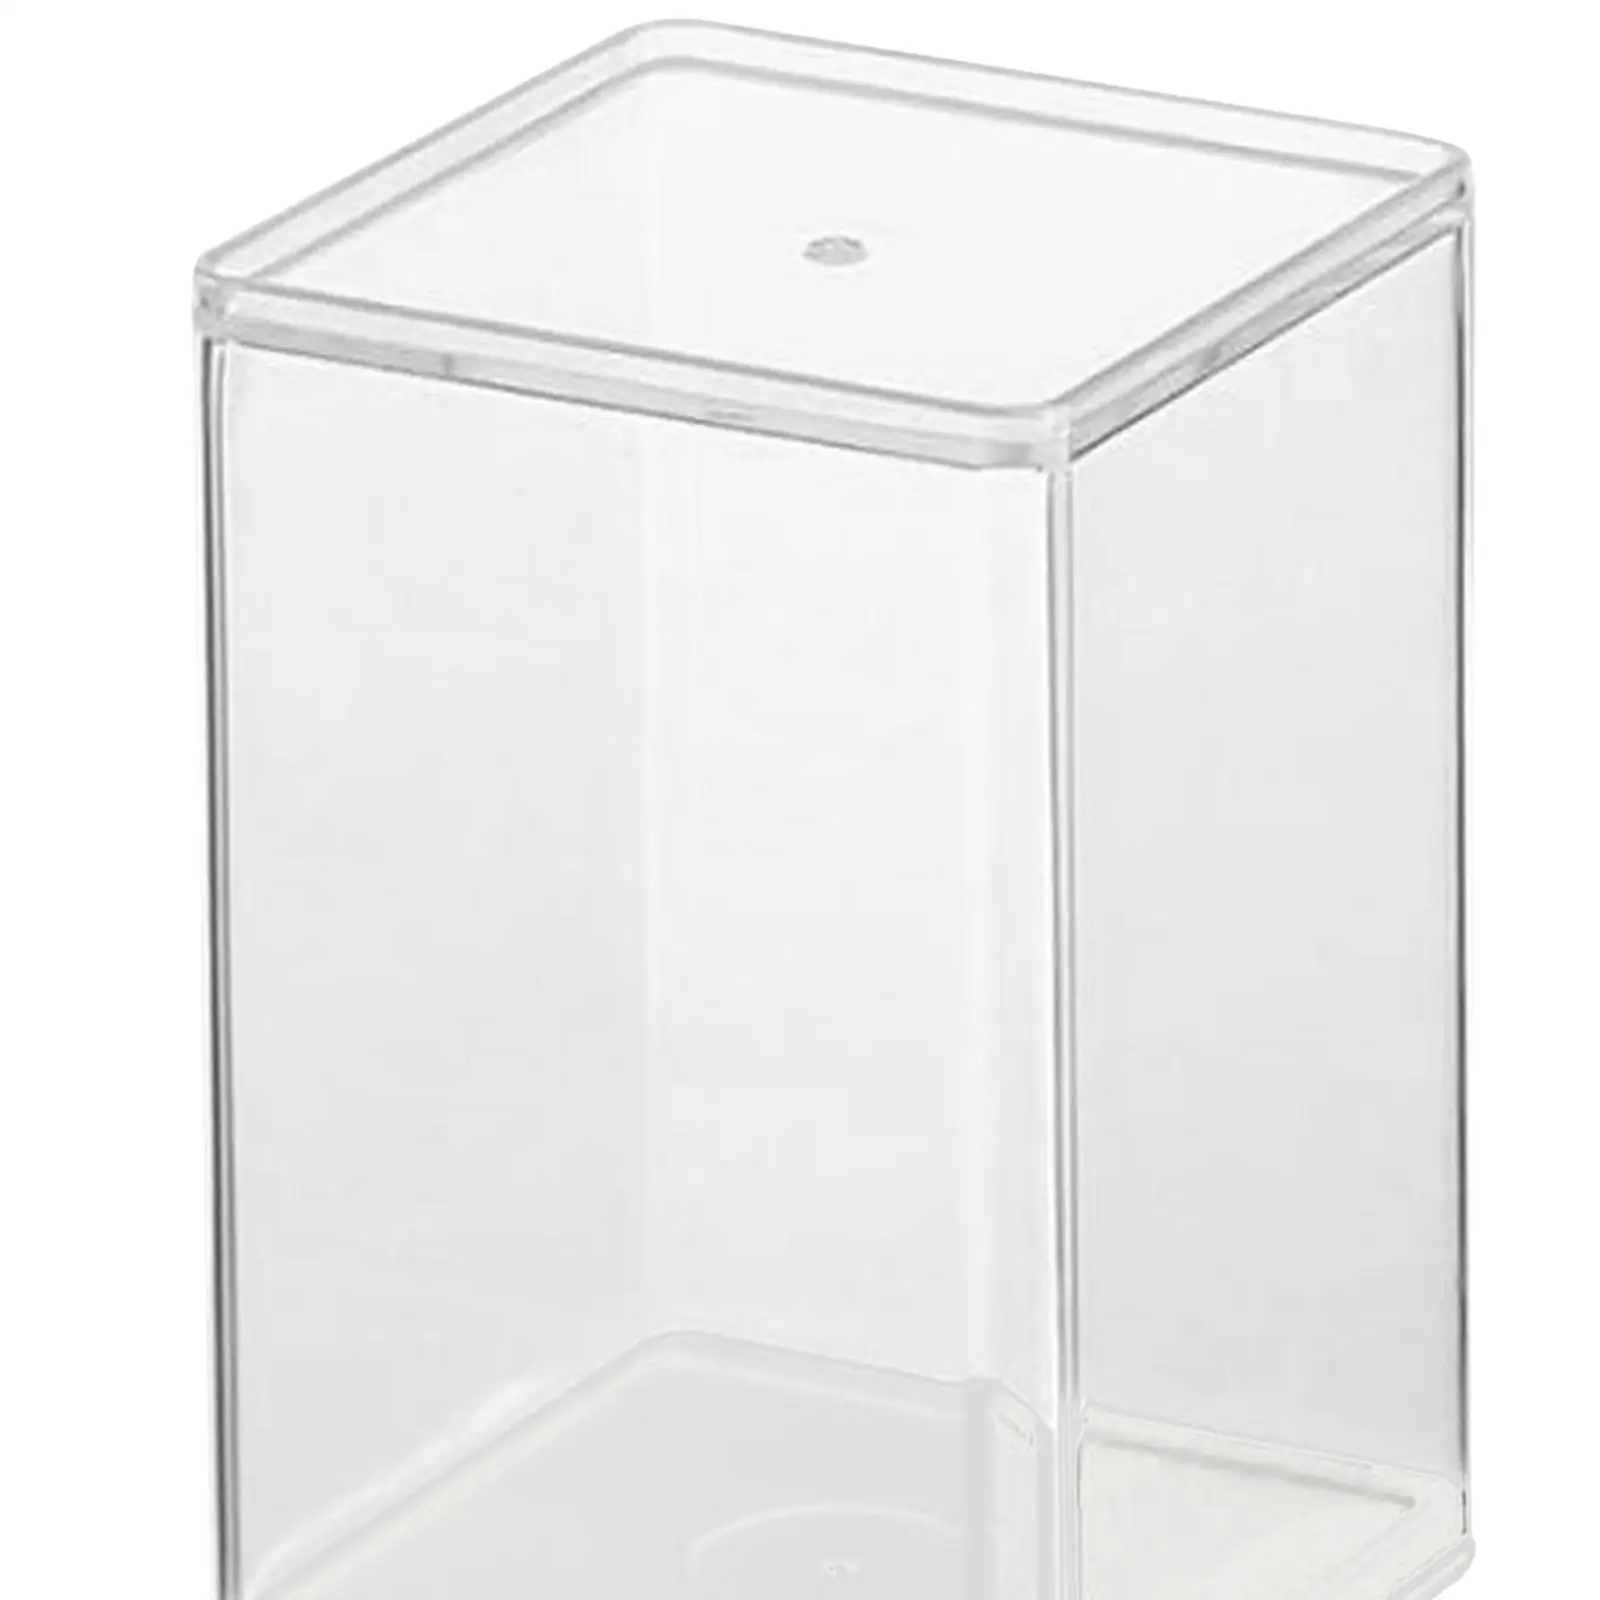 Transparent Acrylic Display Rack Stand Free Standing for Toys Model Dolls